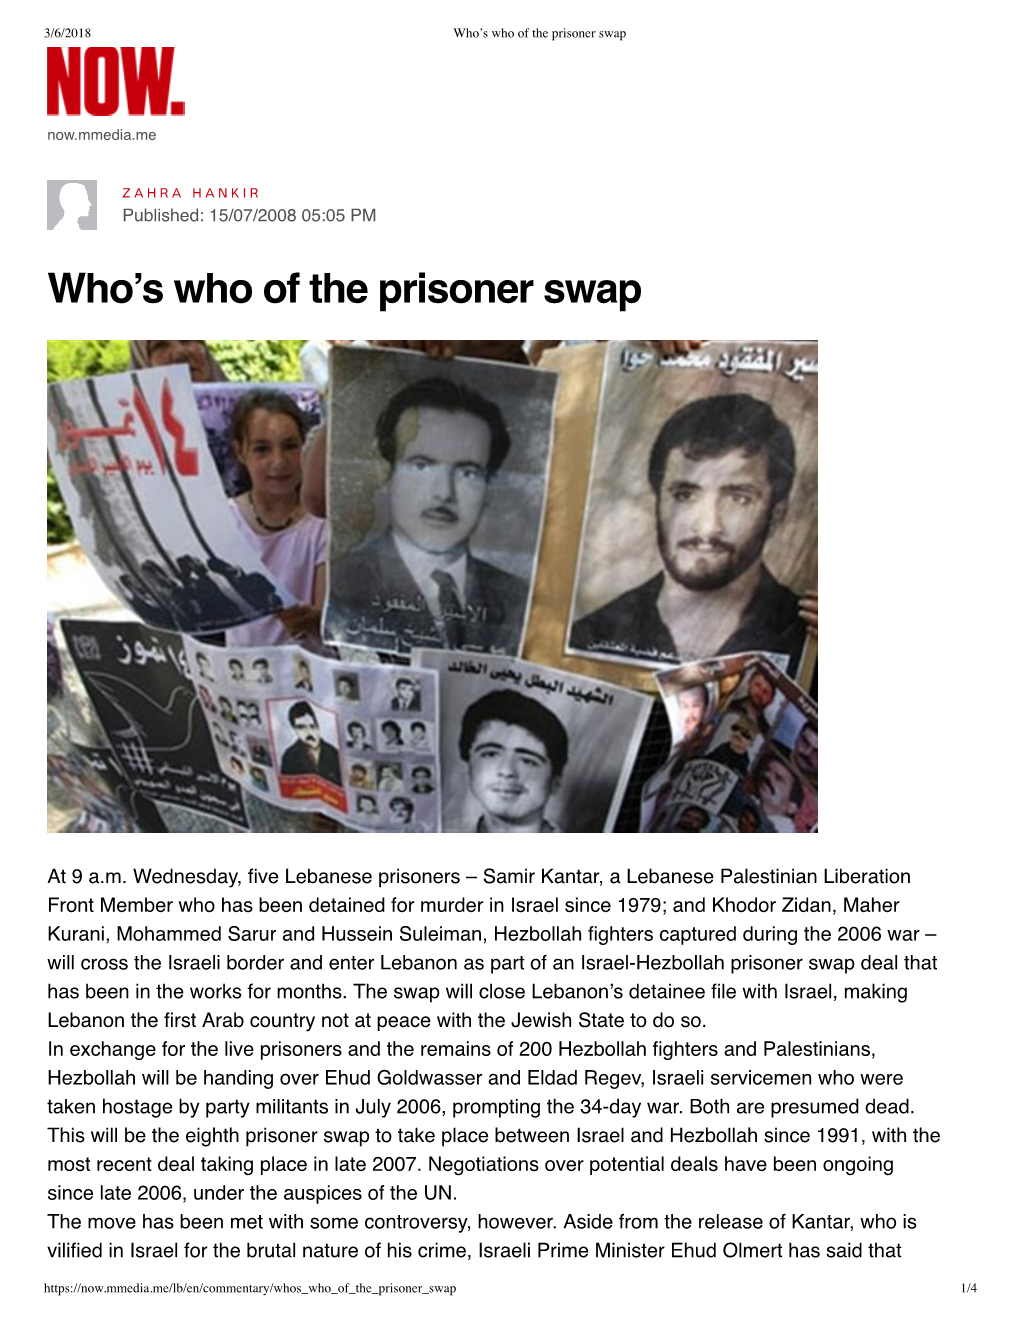 Who's Who of the Prisoner Swap